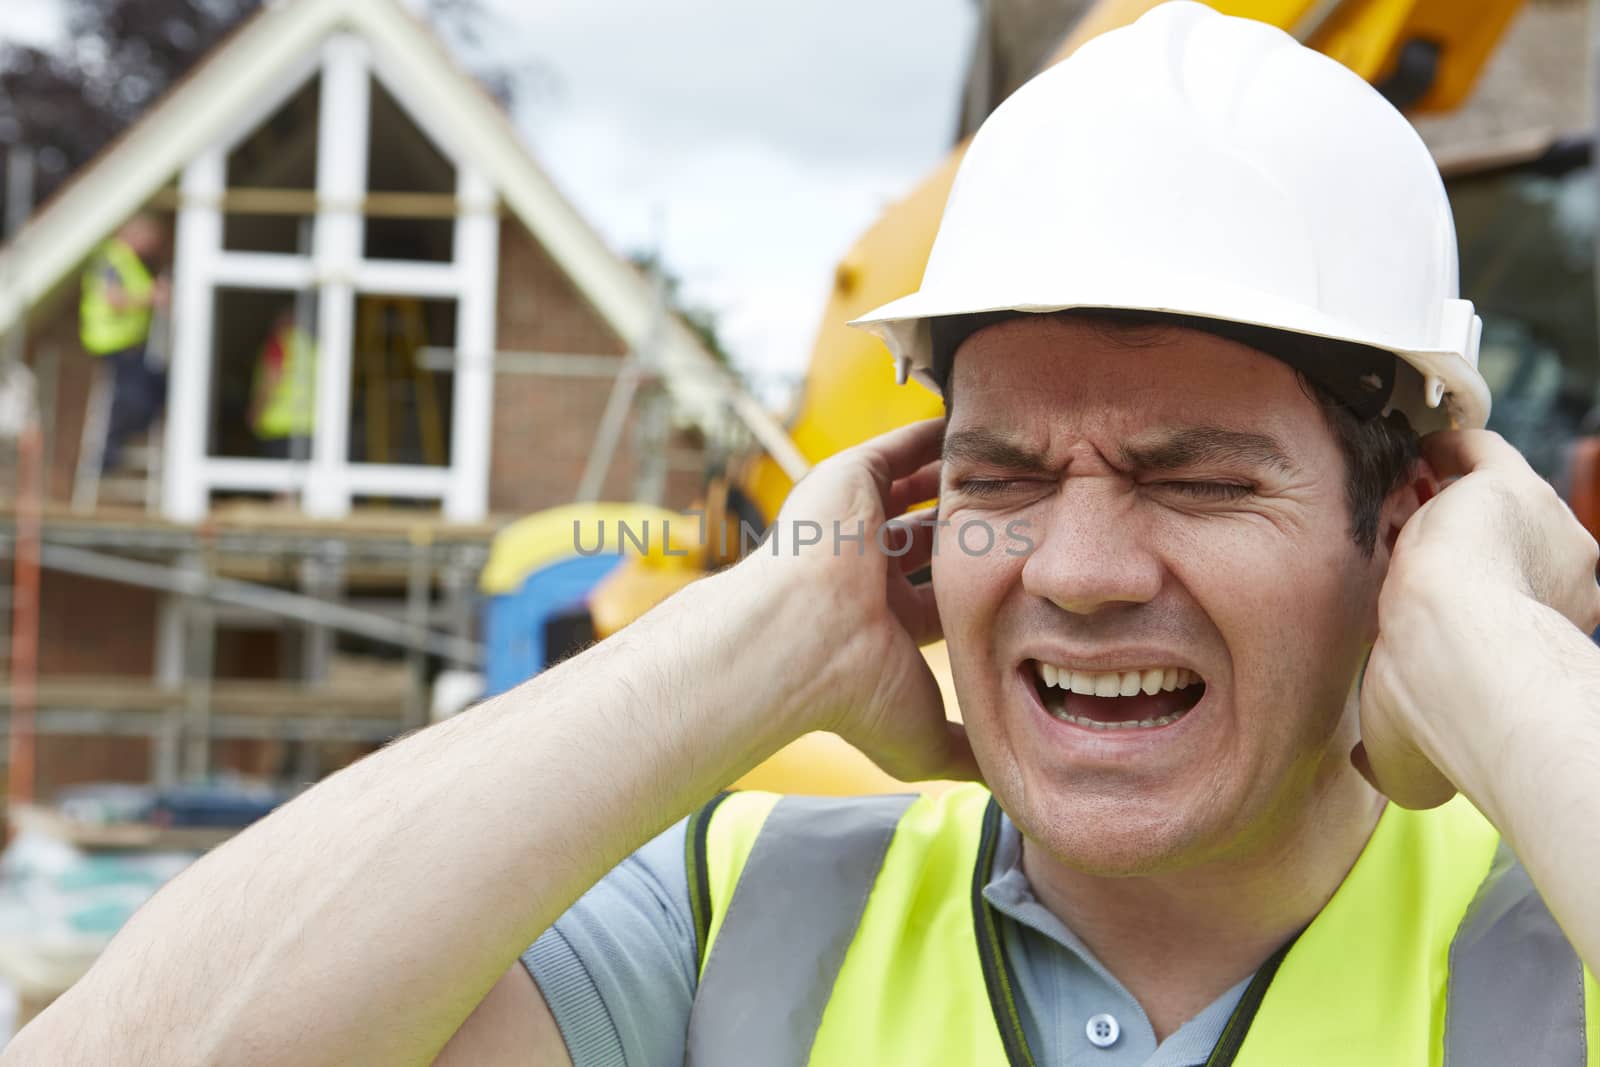 Construction Suffering From Noise Pollution On Building Site by HighwayStarz